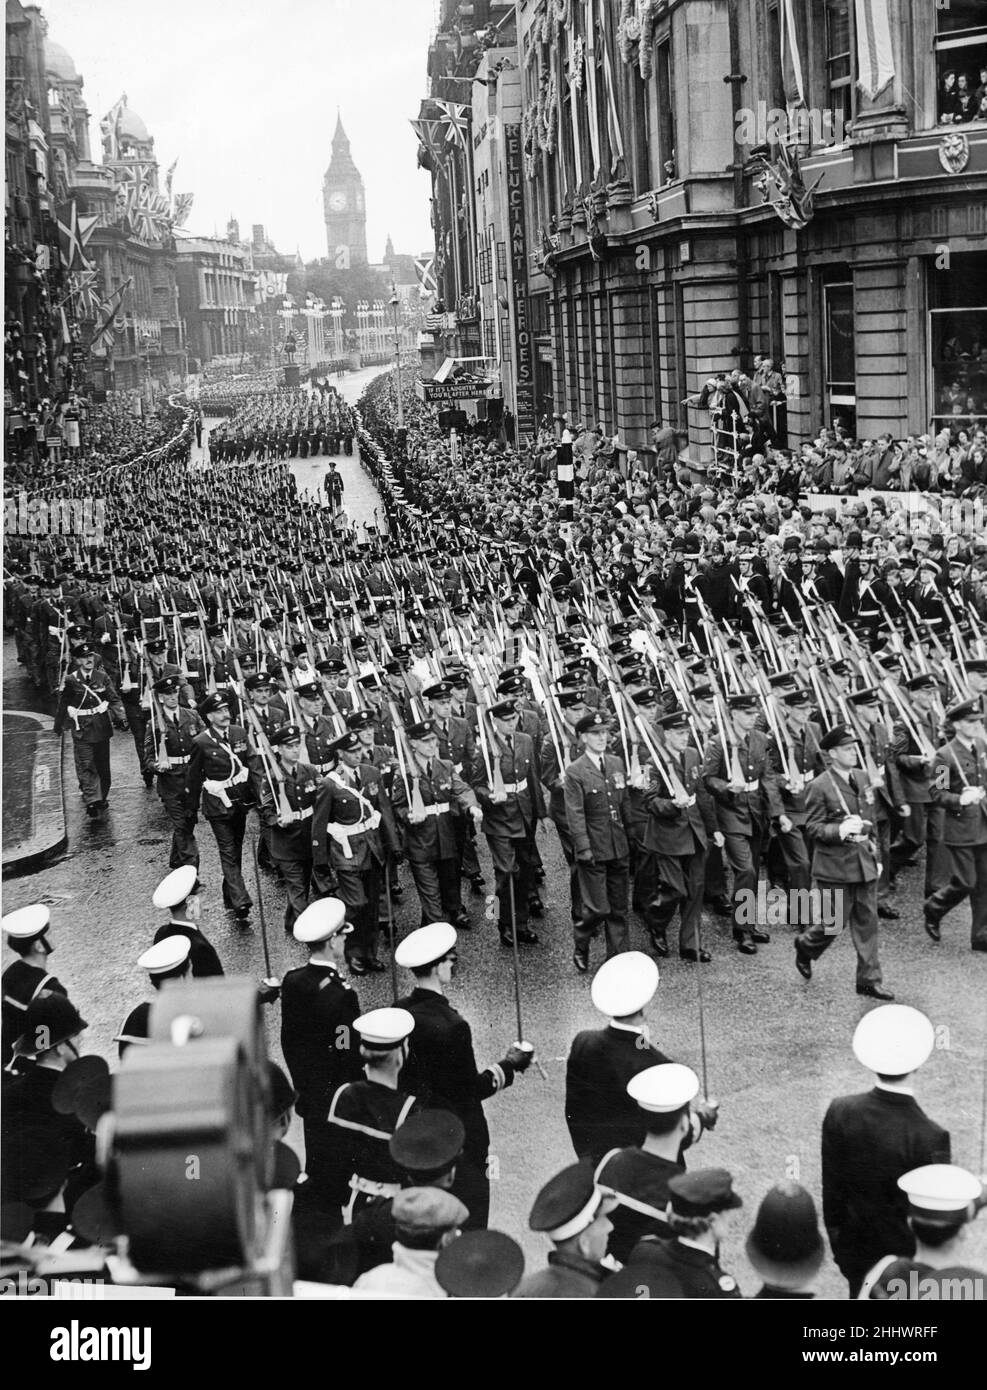 The armed service march along Whitehall after the Coronation of Queen Elizabeth II  at Westminster Abbey. The Contingent of the Royal Navy and Royal MarinesThe Officer Commanding the Contingent, Captain V. C. Begg, D.S.O., D.S.C., R.N. With detachments from: Royal Marines and Royal Marines Forces Volunteer Reserve. Followed by First Detachment of the Foot Guards The Officer Commanding the First Detachment, Lieut-Colonel B. O. P. Eugster, D.S.O., M.C., Irish Guards leading the Band of the Welsh Guards, Band of the Irish Guards, The Corps of Drums of the 1st Bn. Welsh Guards and the Corps of Dru Stock Photo